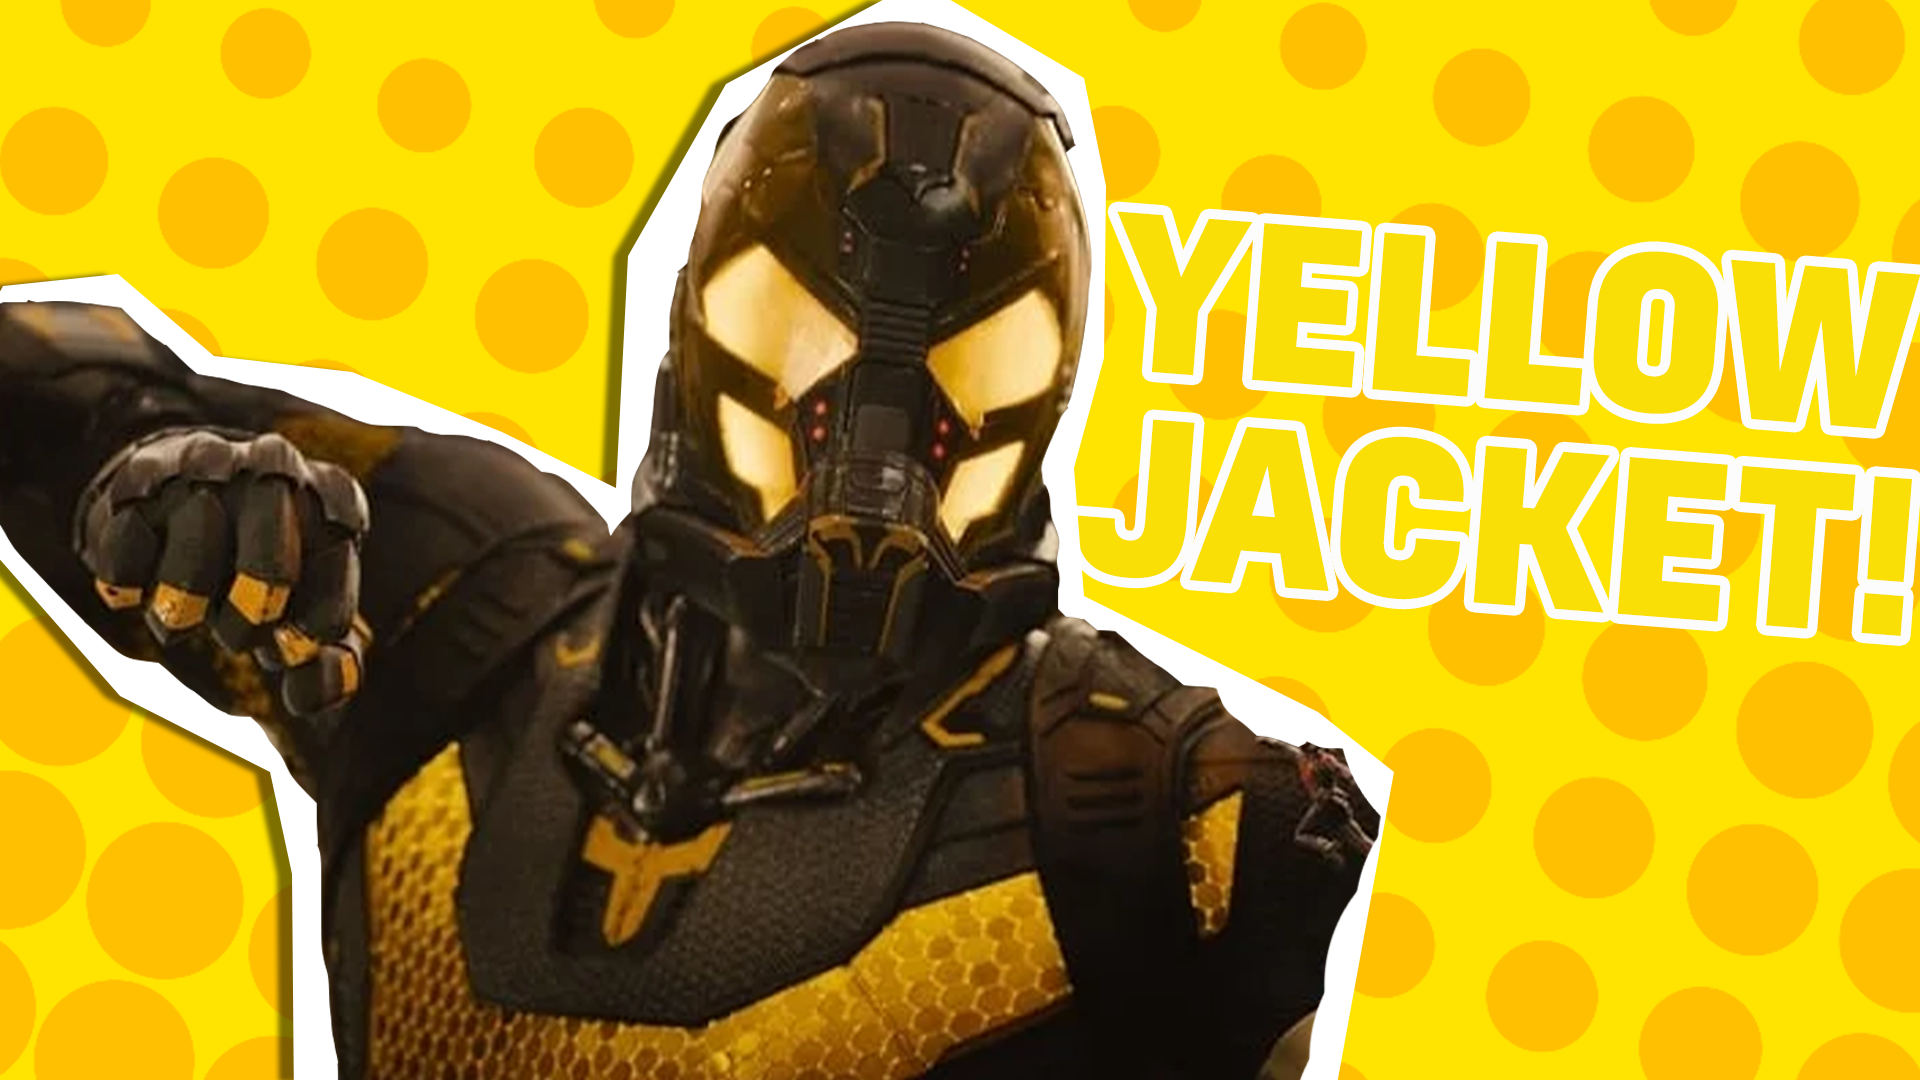 Yellow jacket result